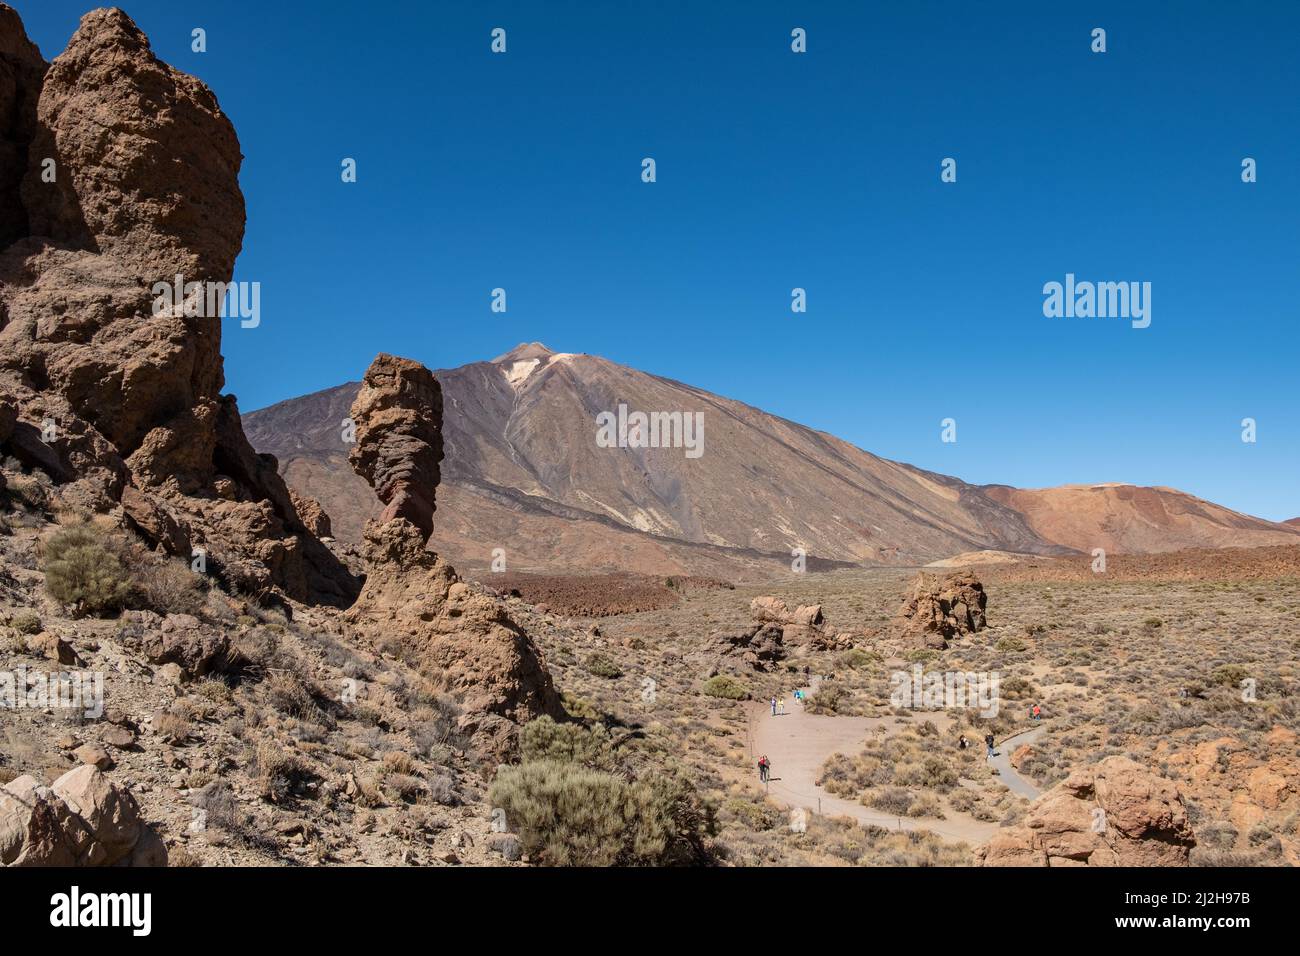 Teide National Park Tenerife with Volcano and the rock formation, called Finger of god. Stock Photo